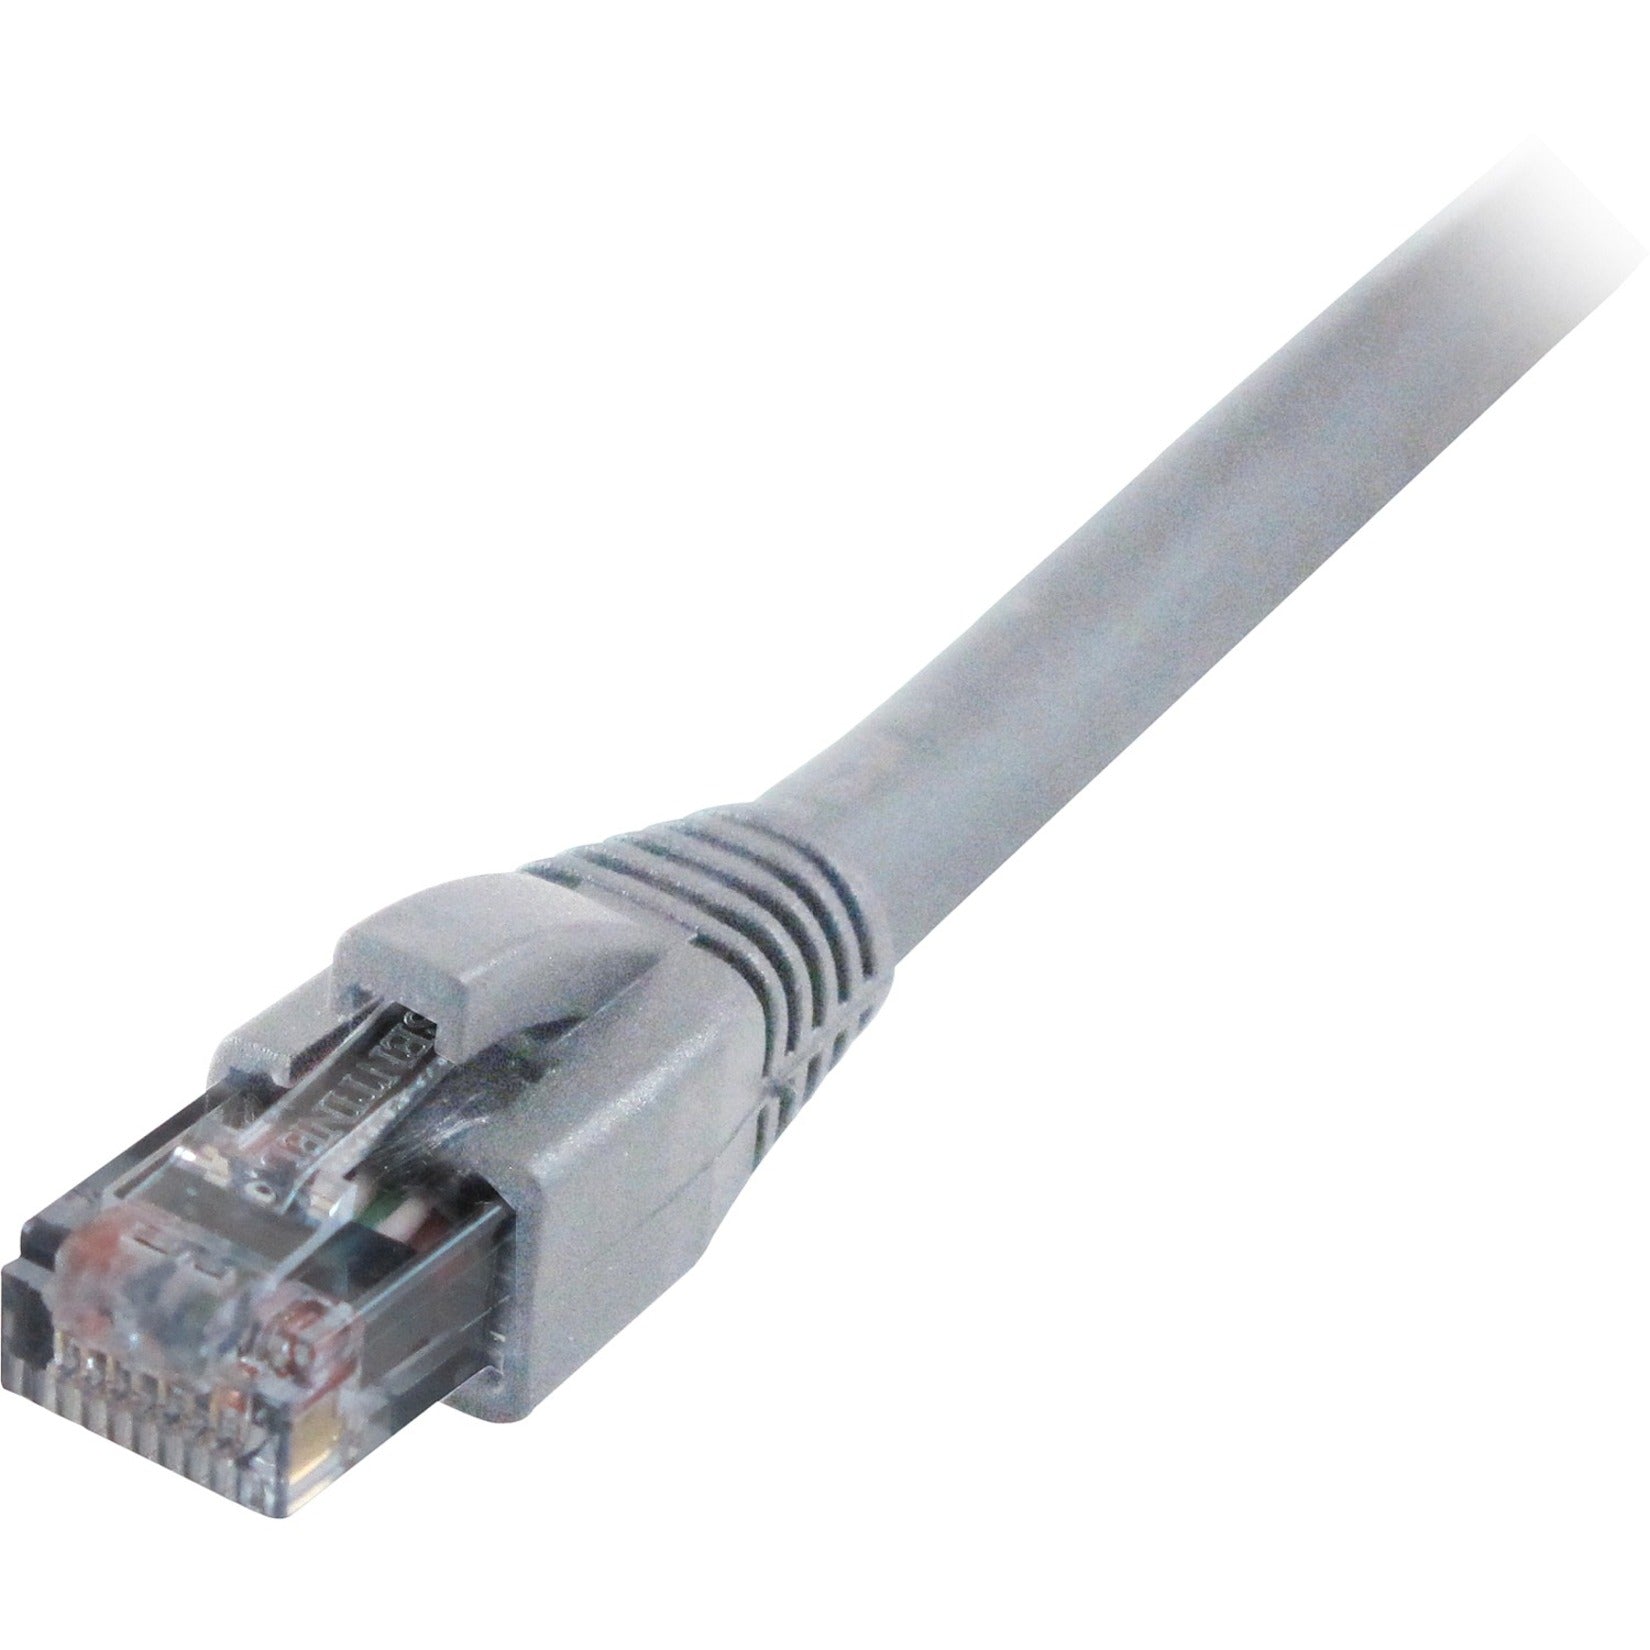 Comprehensive CAT5-350-3GRY Cat5e 350 Mhz Snagless Patch Cable 3ft Gray, Molded, Strain Relief, Stranded, Booted, 1 Gbit/s Data Transfer Rate